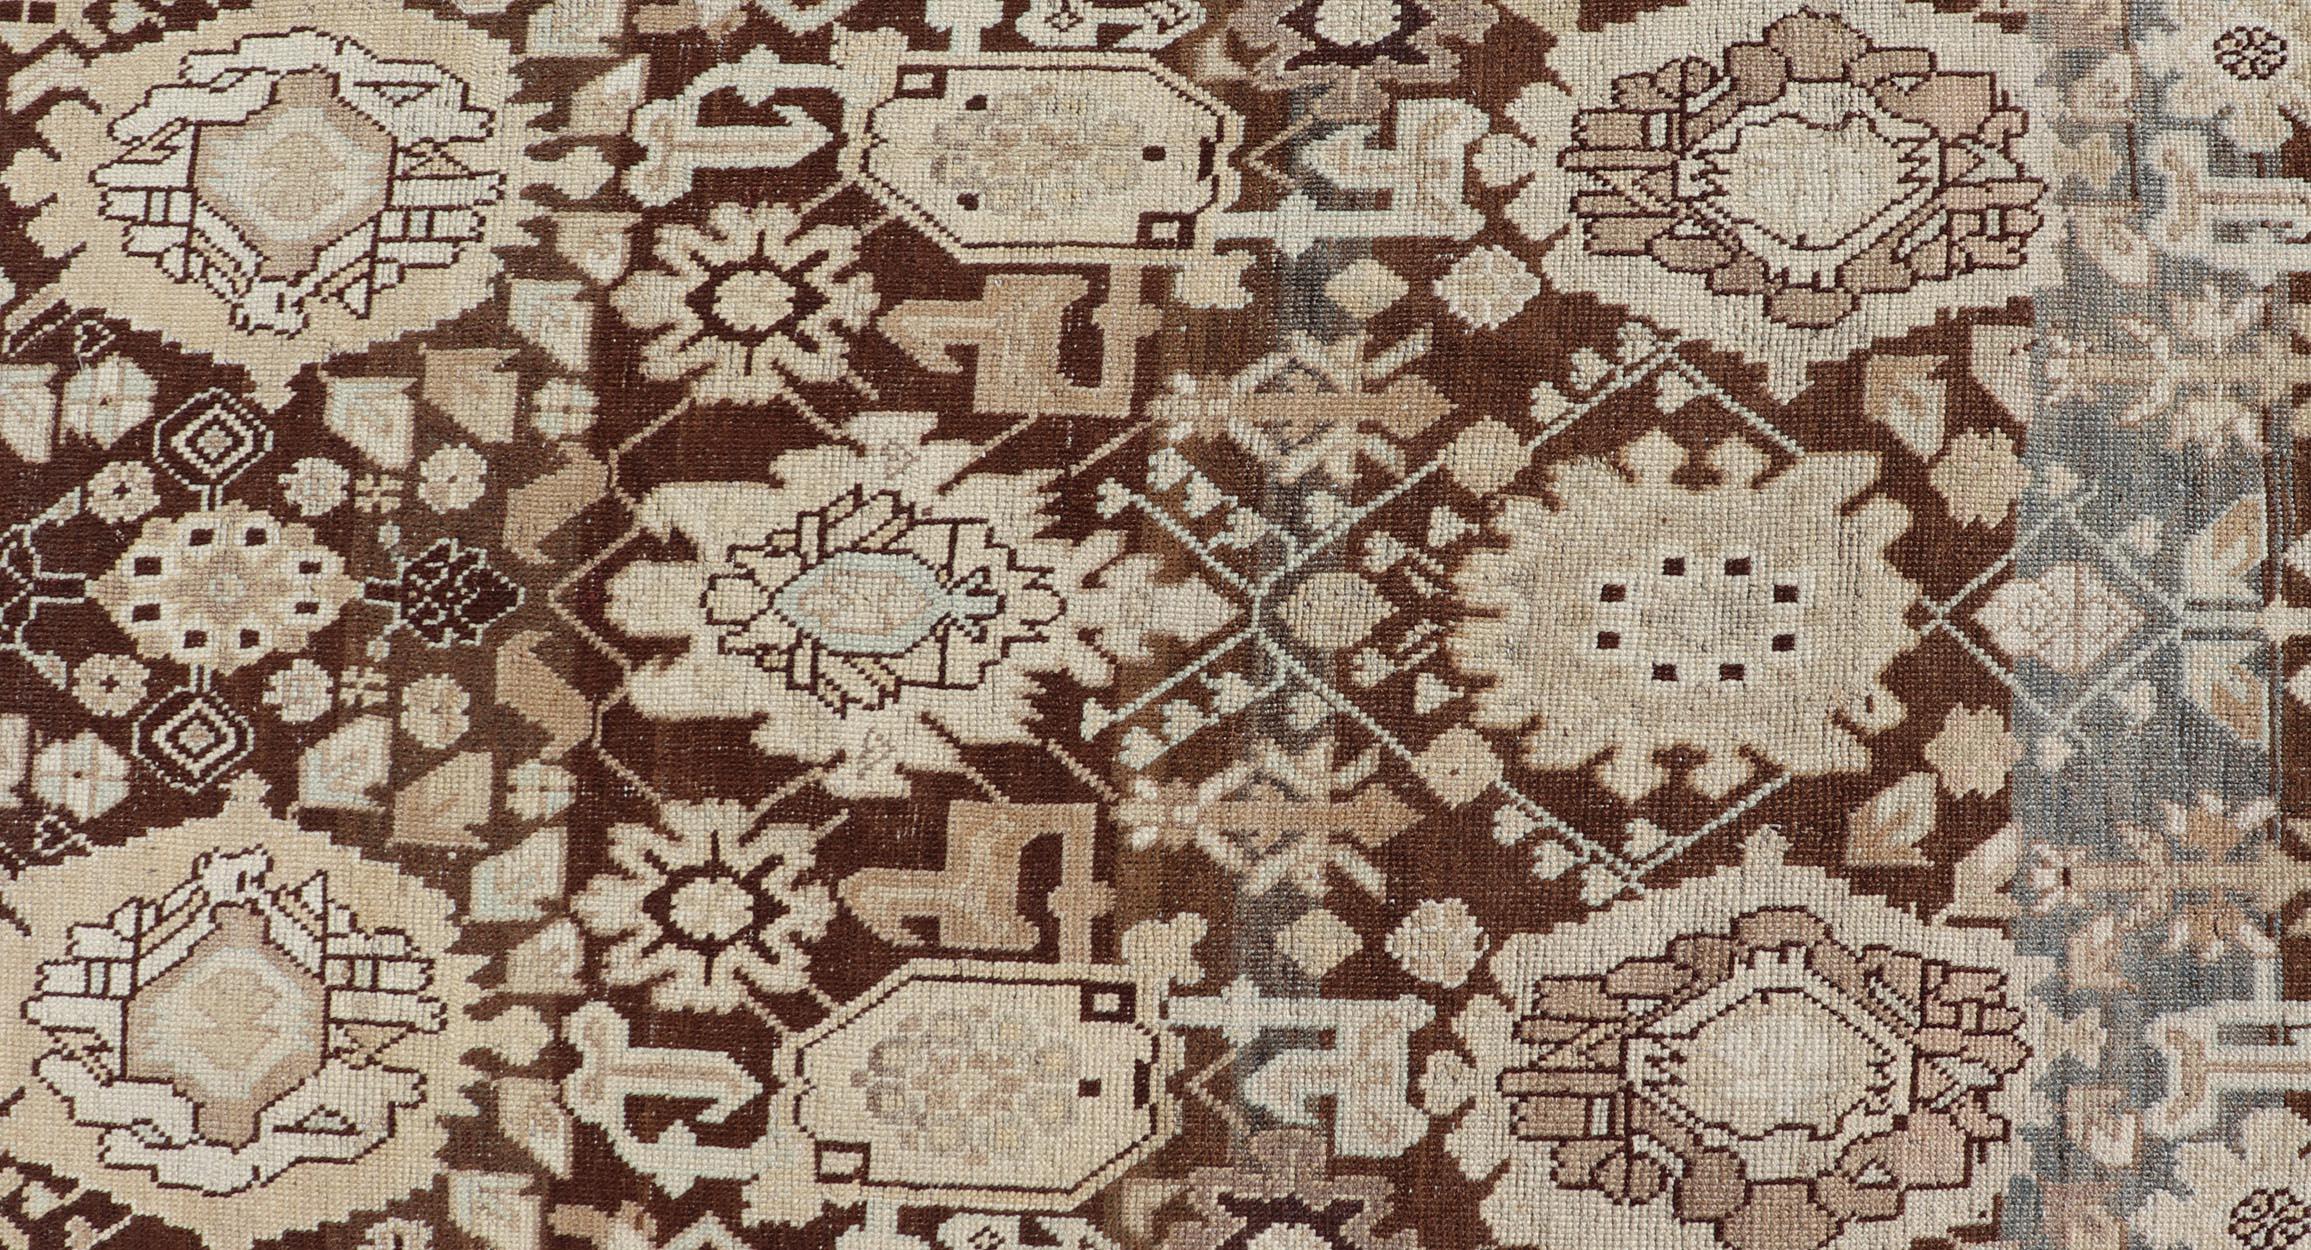 Antique Karabagh Runner with All-Over Floral Medallion Design in Brown and Tan For Sale 1